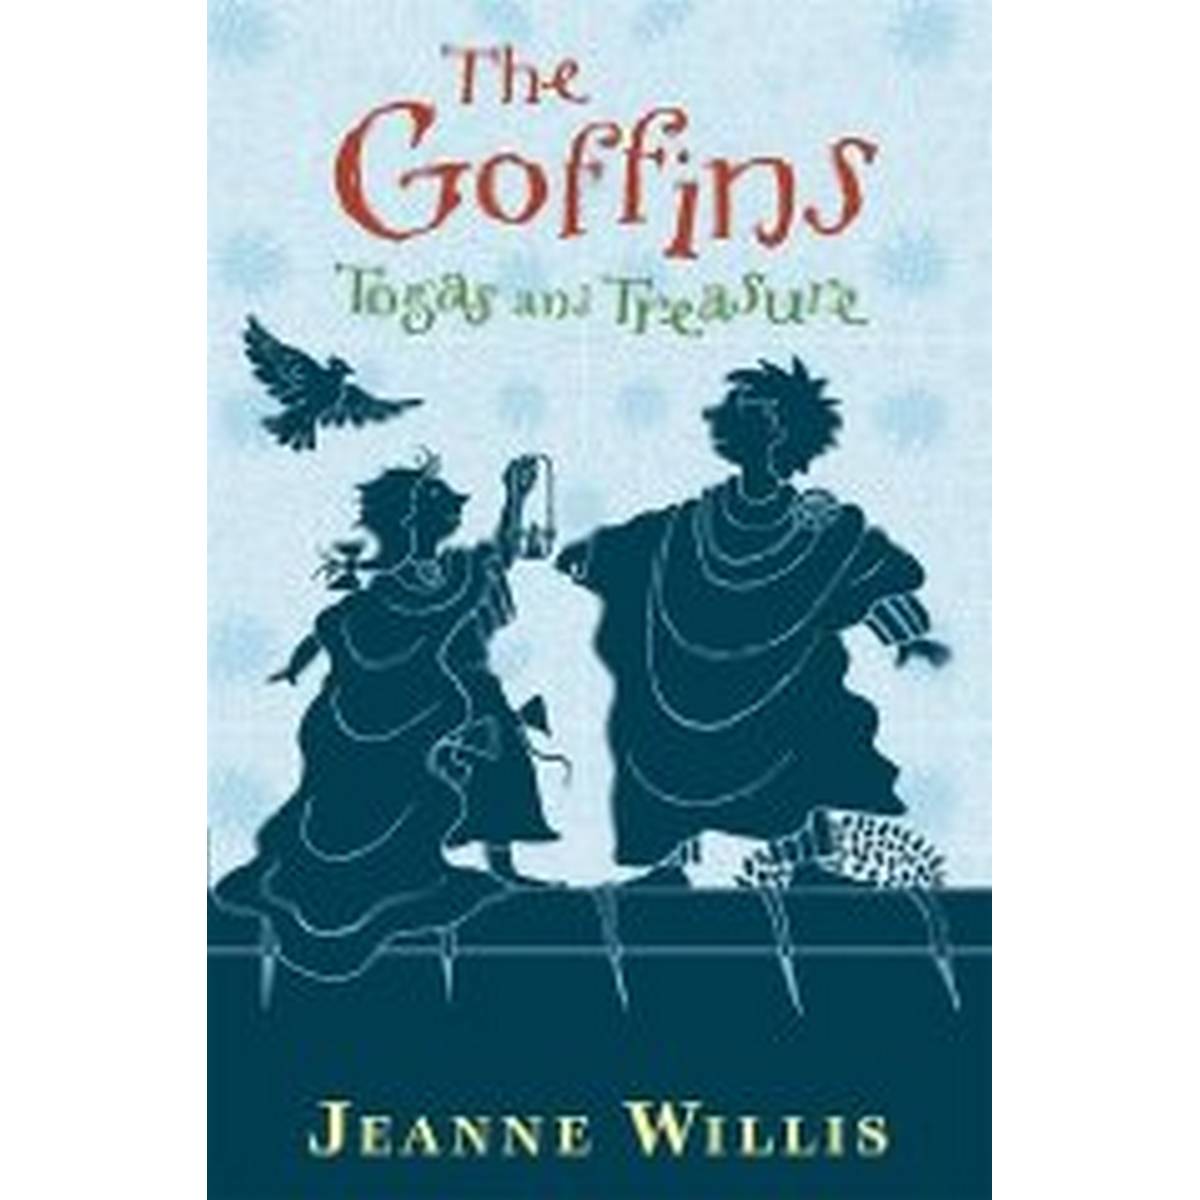 The Goffins: Togas and Treasure